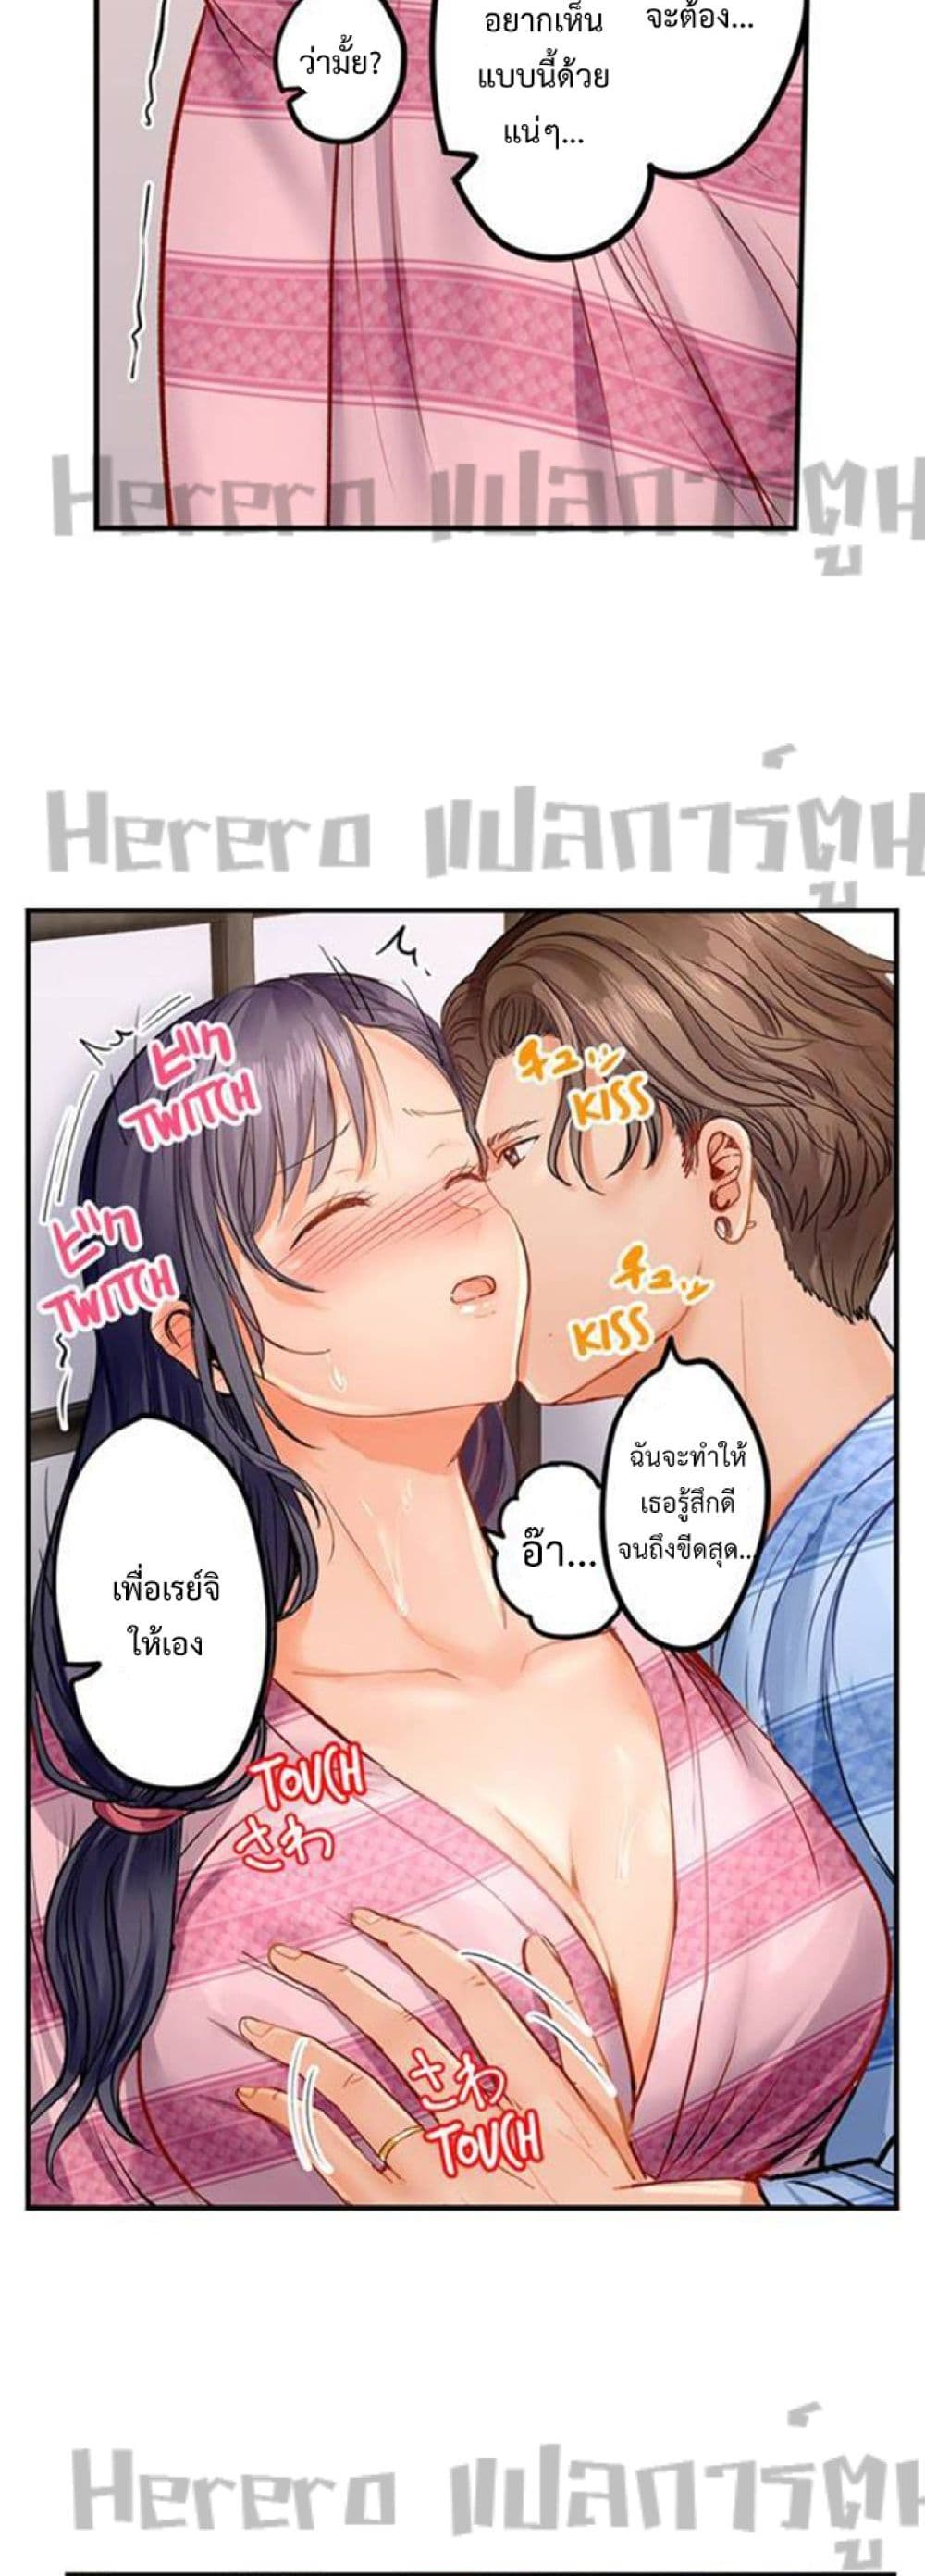 Married Couple Swap ~He’s Better Than My Husband~ 10 (20)